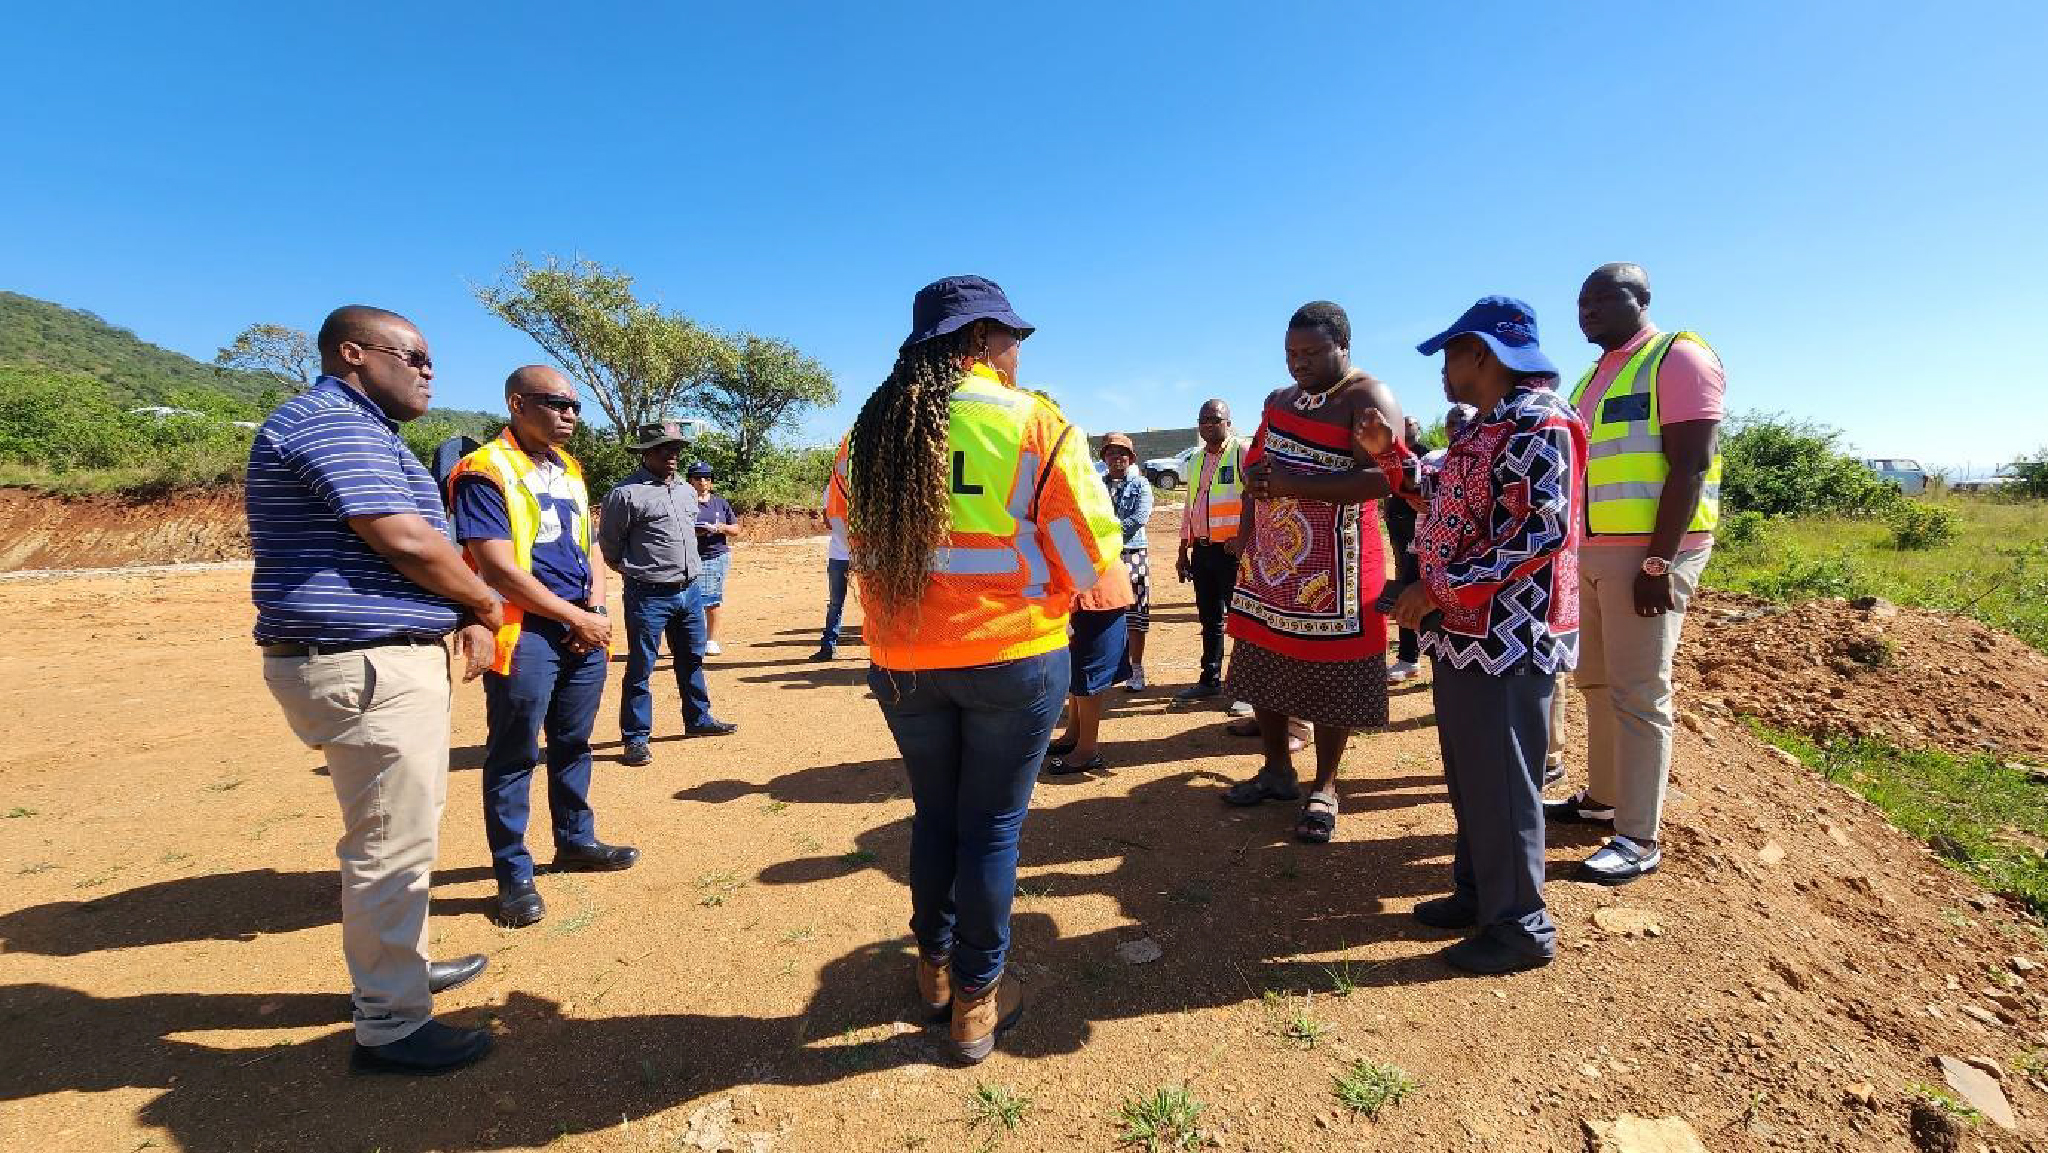 On the 13 th April the Honourable Minister of Public Works and Transport of the Kingdom of Eswatini toured household resettlement sites where construction has started. This photo was taken during the tour.